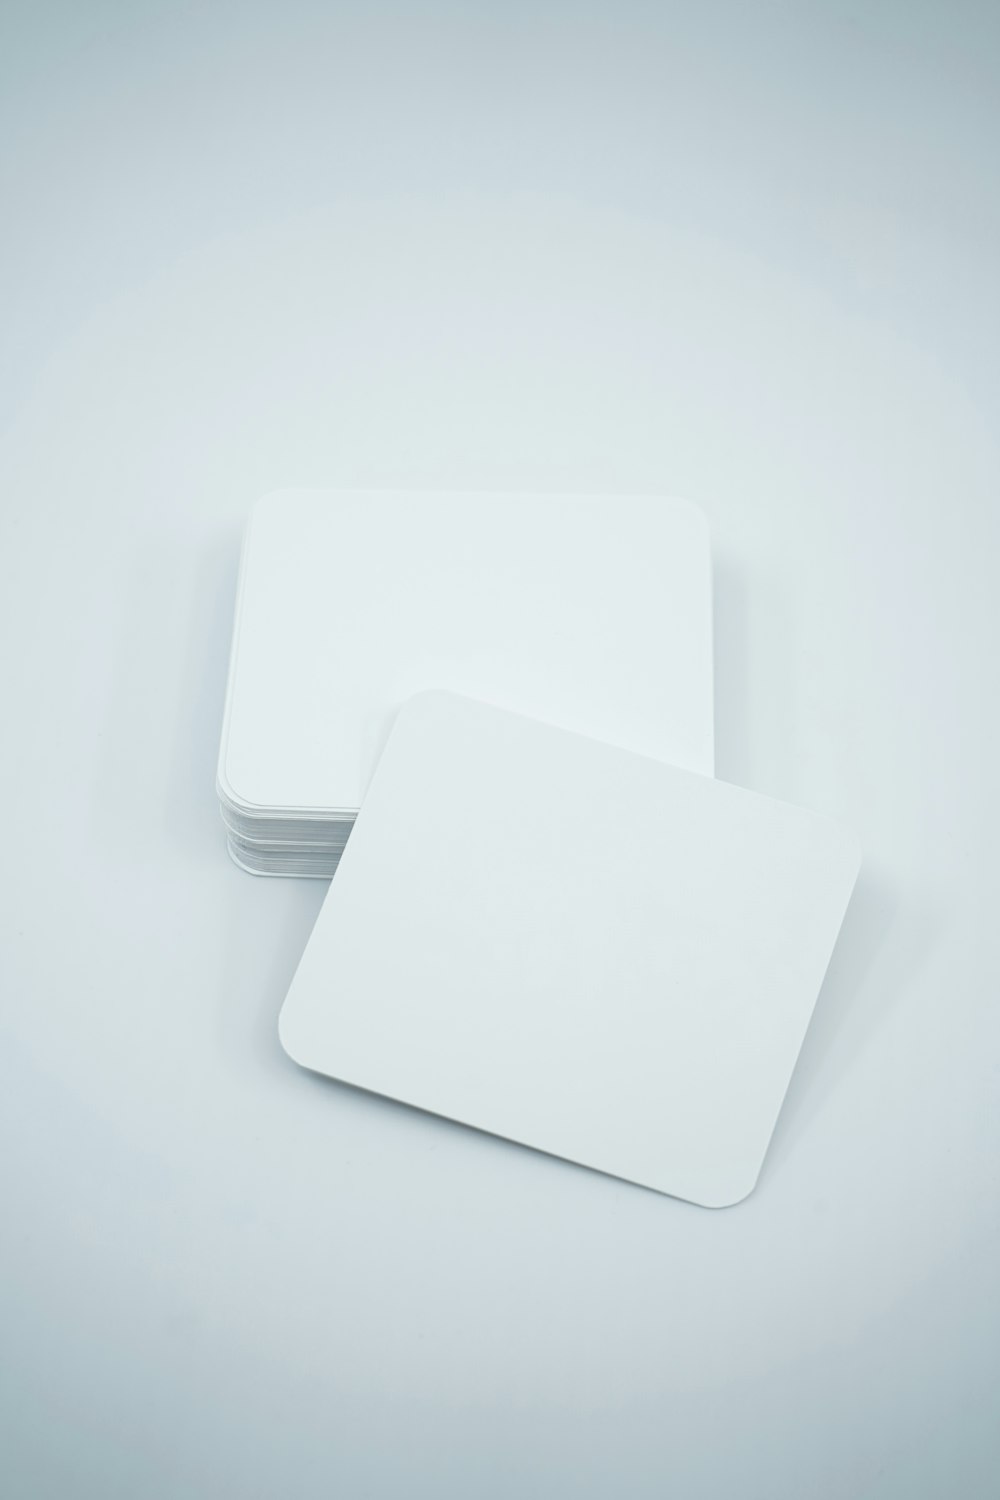 New Paper Coasters Stock Photo - Download Image Now - Coaster, Paper, Blank  - iStock